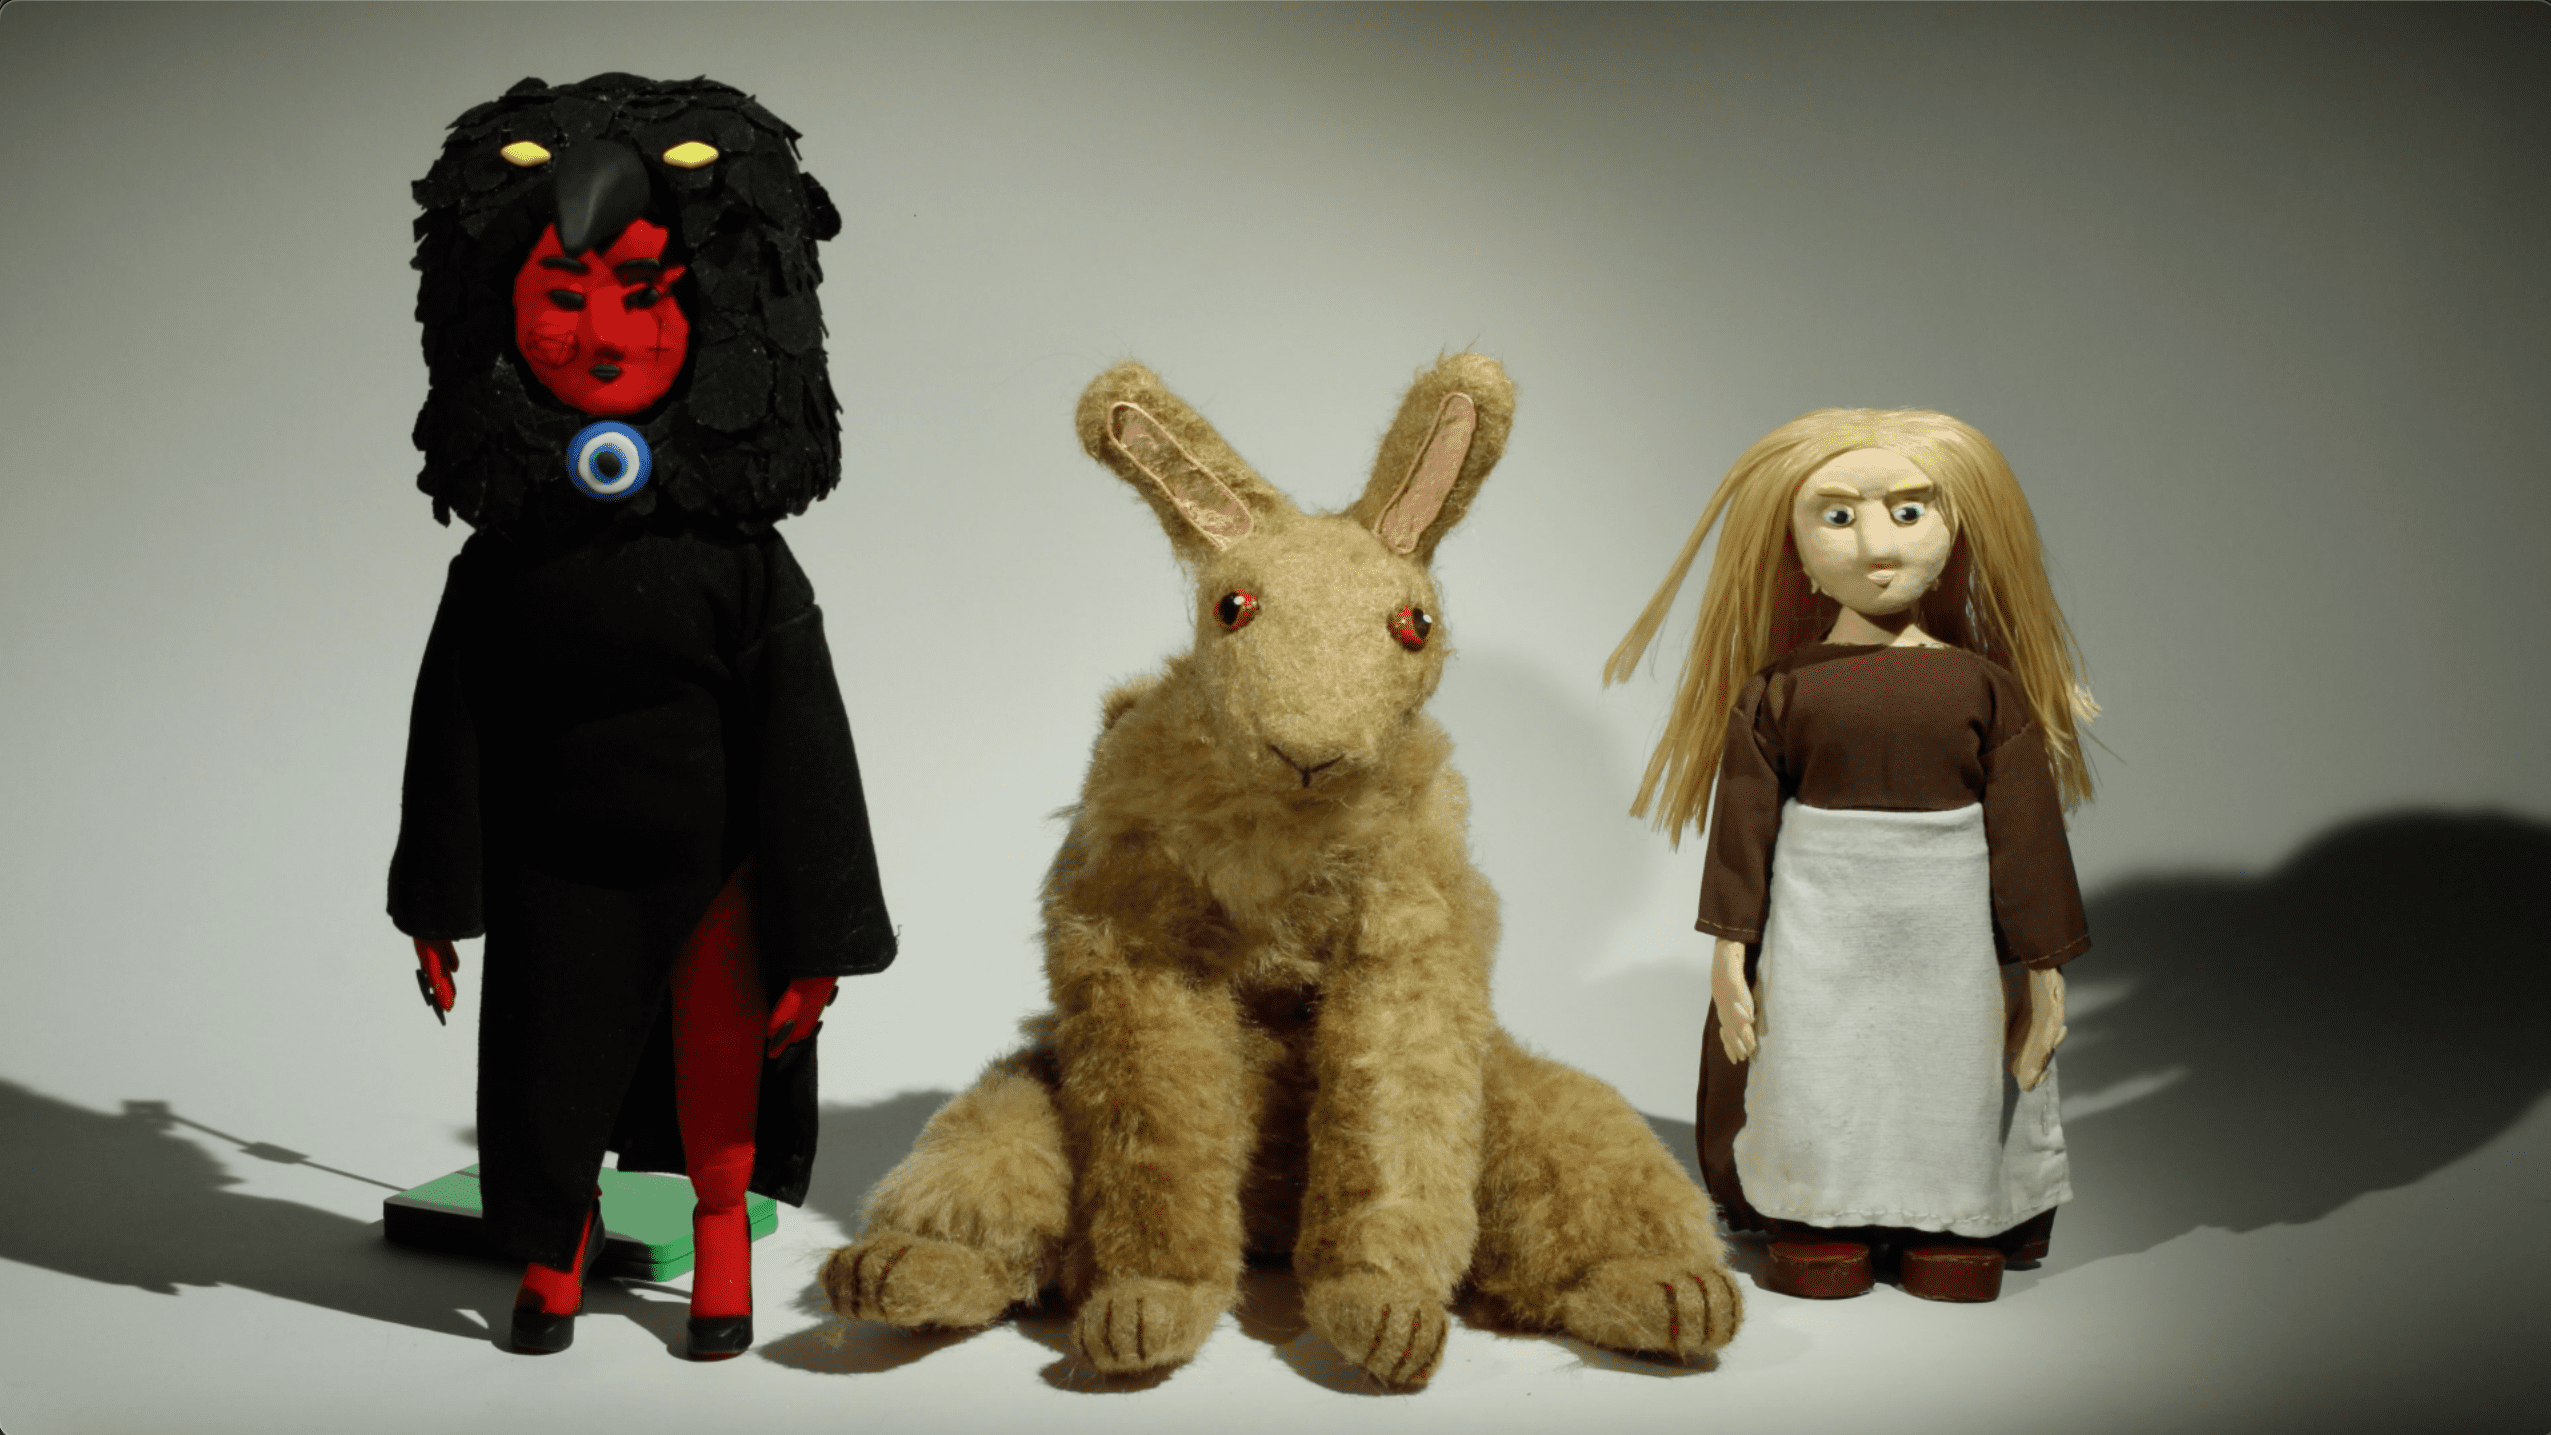 Film by Emilie Perkins showcasing three stop motion puppets made for her final major project "The Witching Hour."